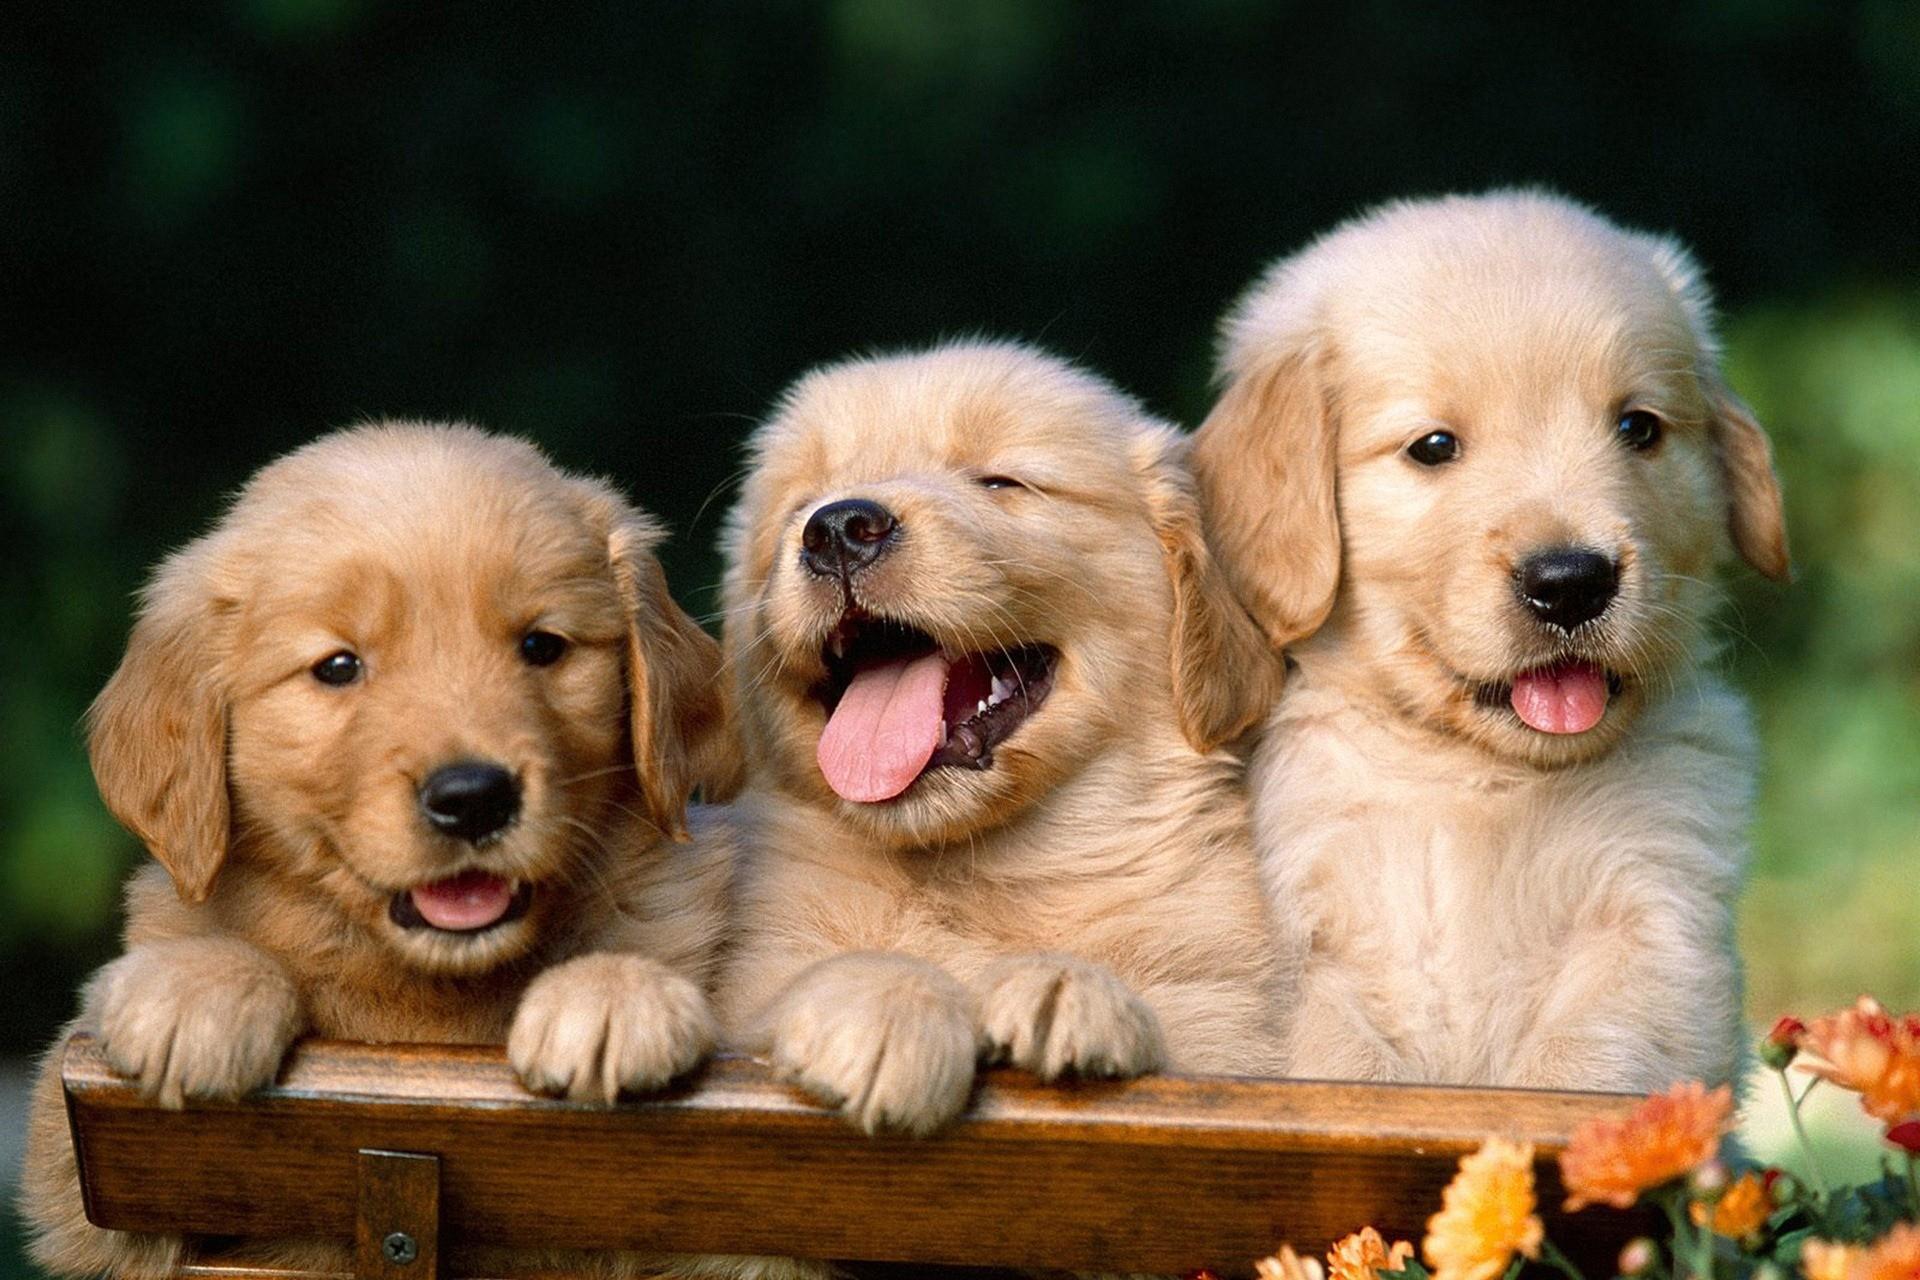 Cute Dogs Hd Wallpapers 1080p : Download Dogs Full Hd Wallpapers ...